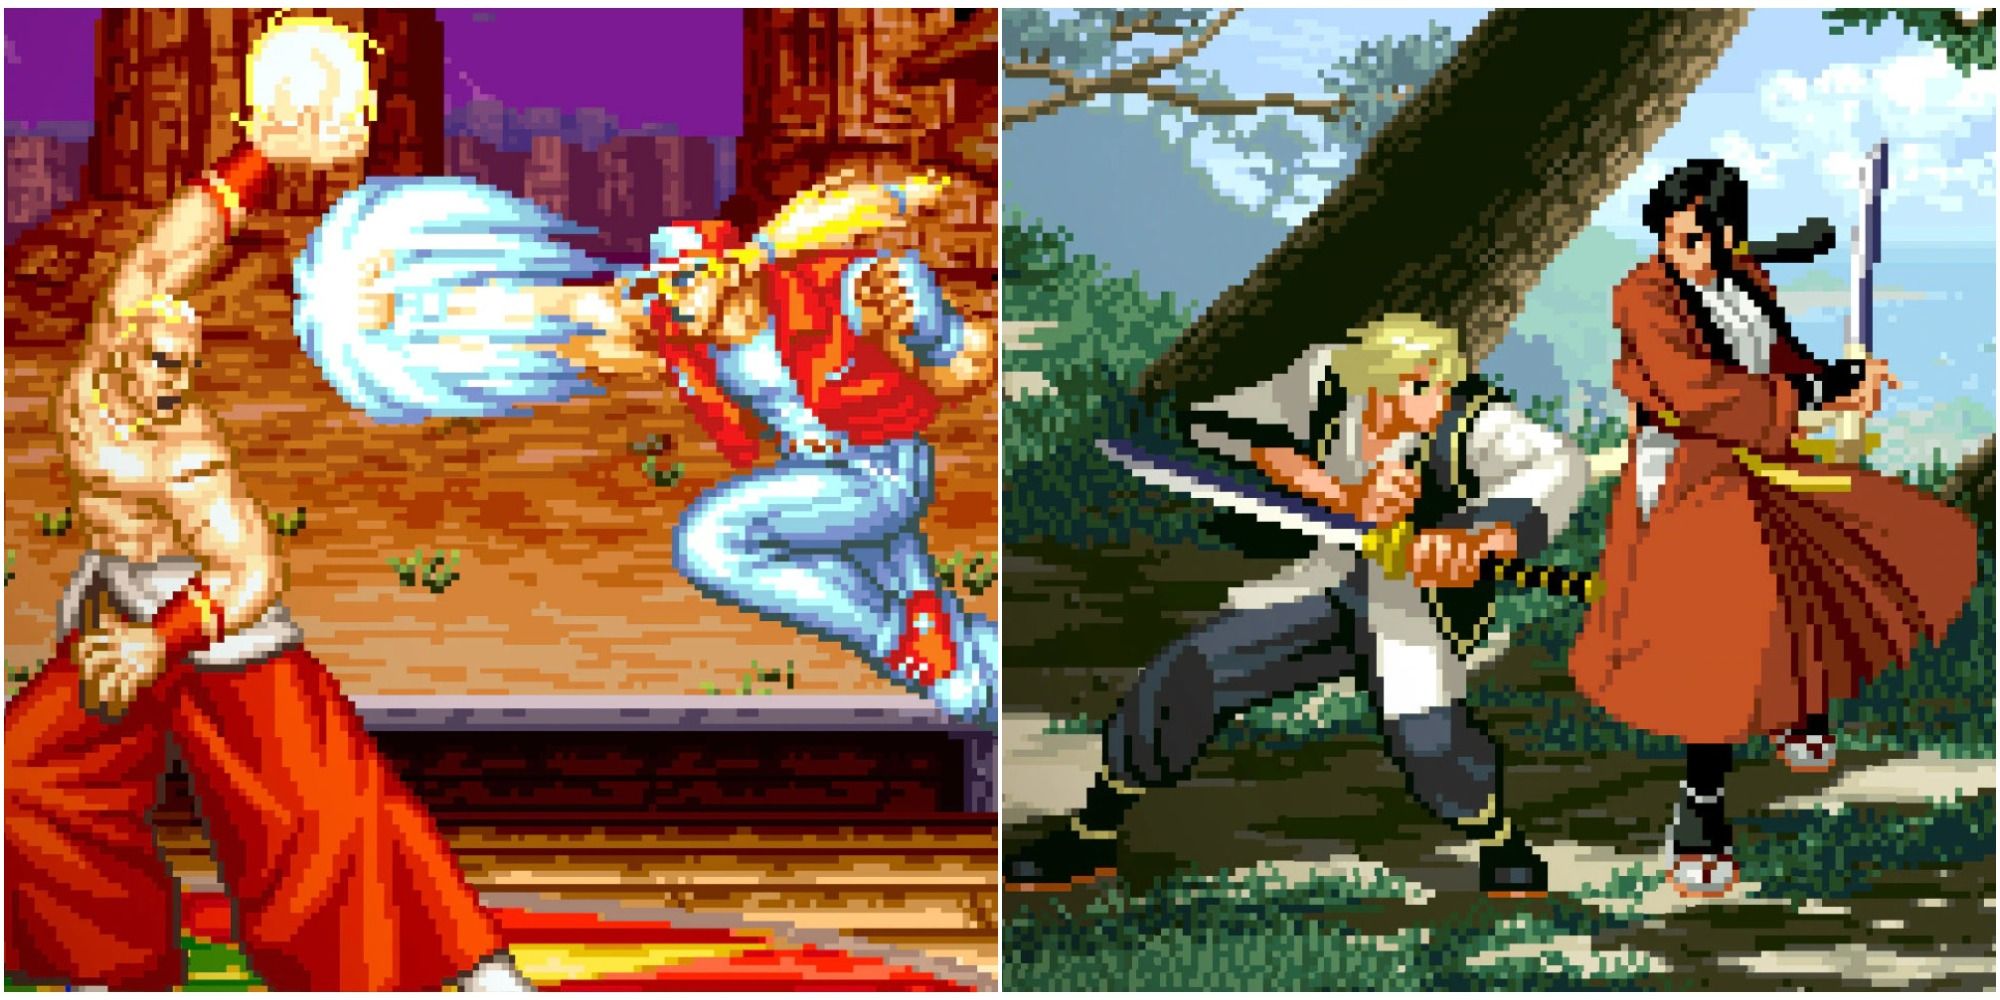 Fatal Fury: First Contact - Metacritic